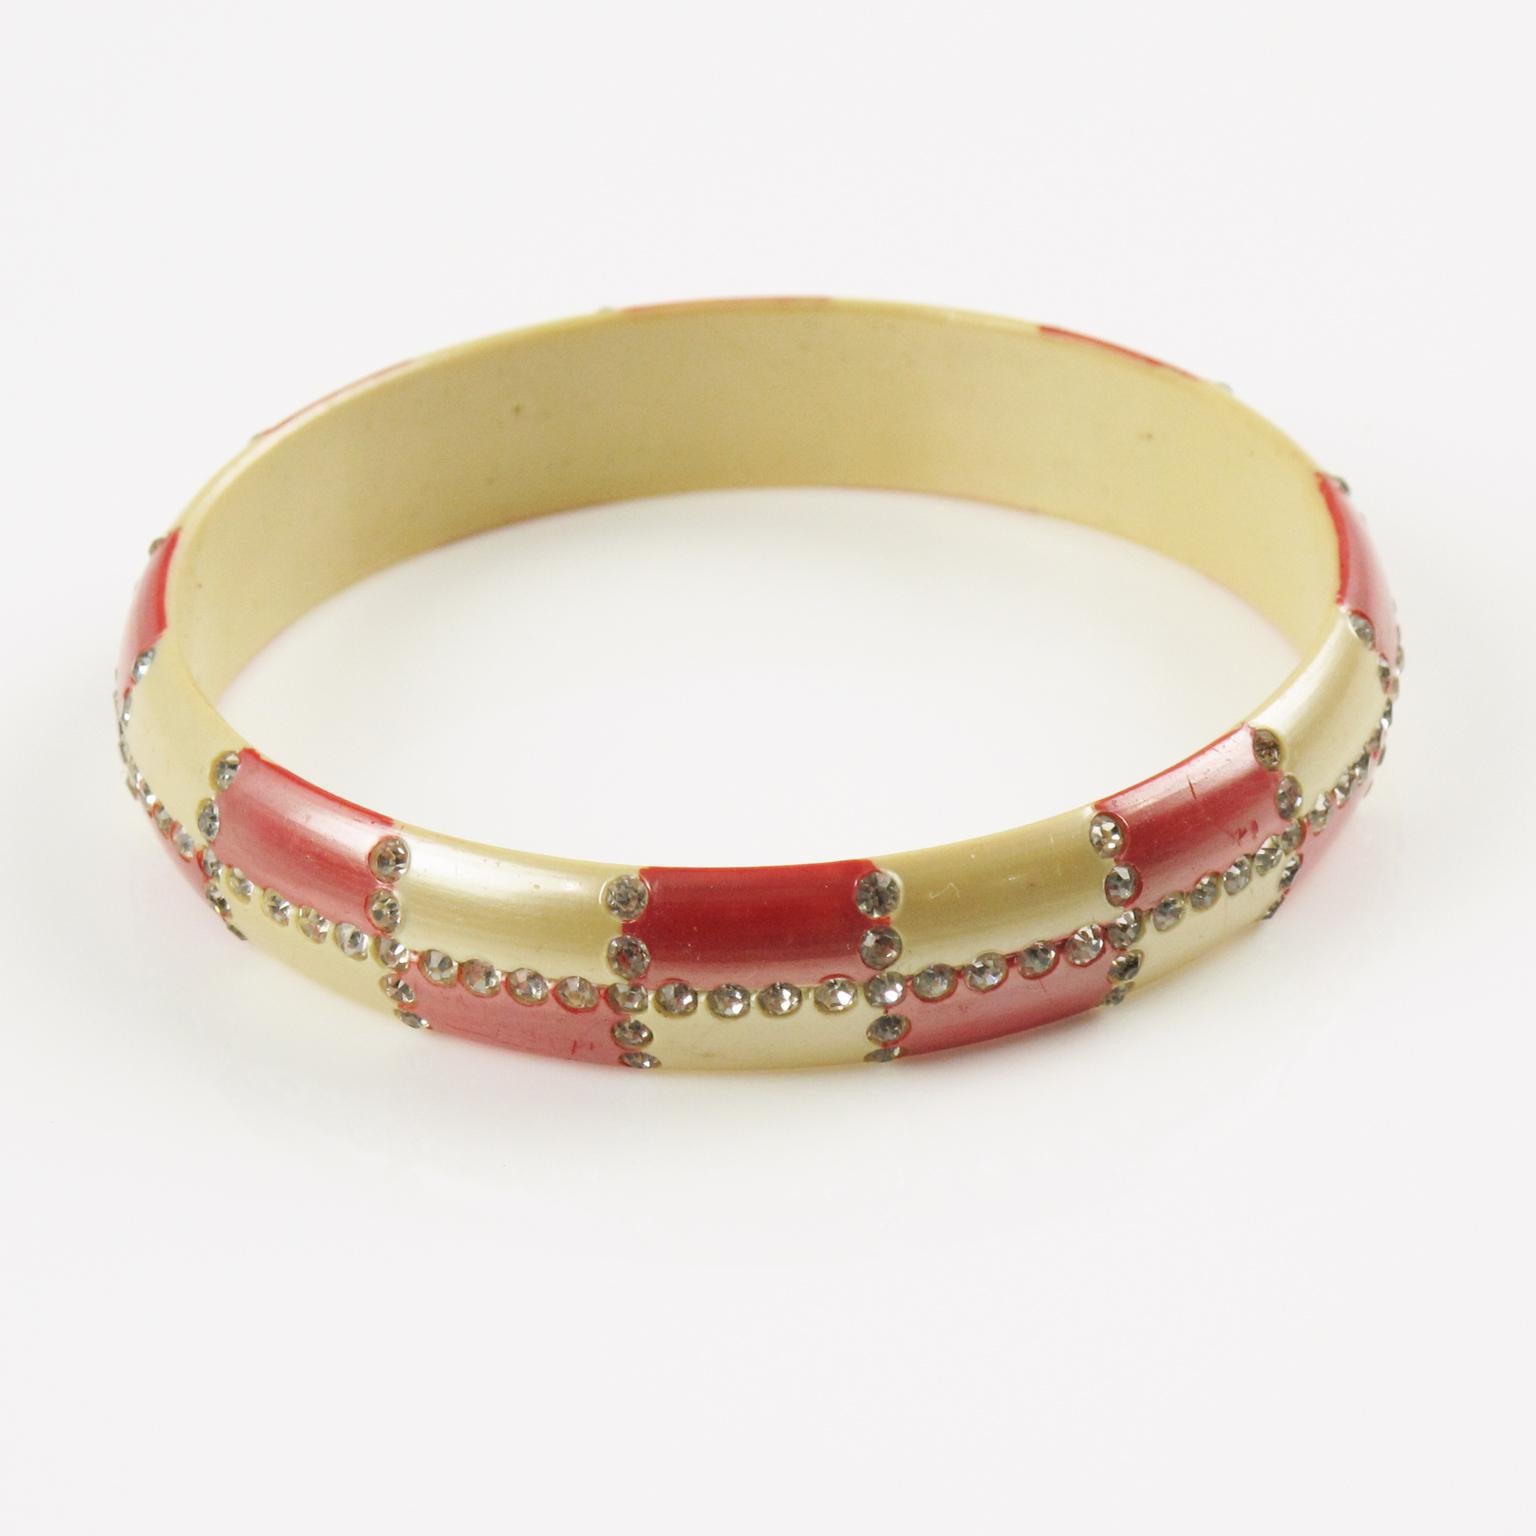 Stunning French celluloid and sparkle bracelet bangle. Pearlized nacre and red colors ornate with geometric checkerboard design made of tiny clear crystal rhinestones. The 1920s flapper style where those bracelets were made to be combined, layered,